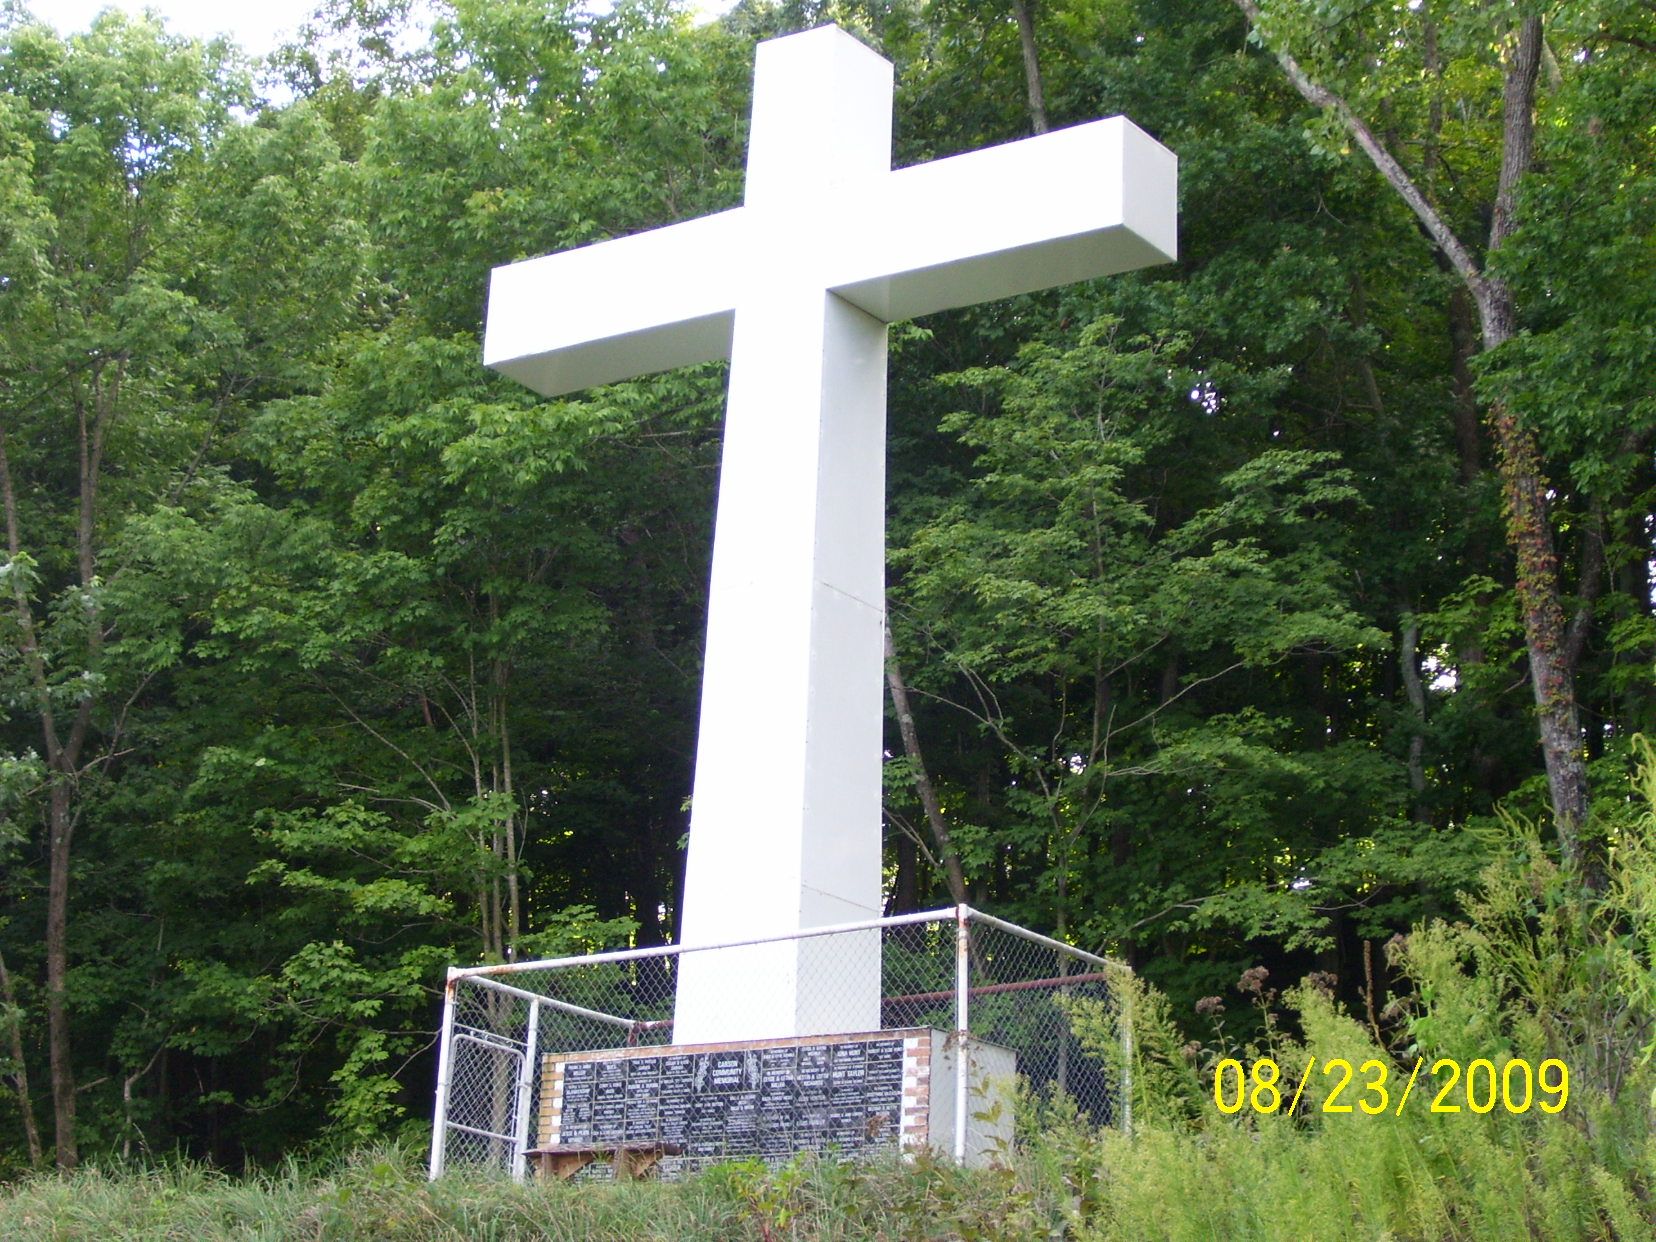 This cross is over by Ramsey Illinois. The place is called Wren ...